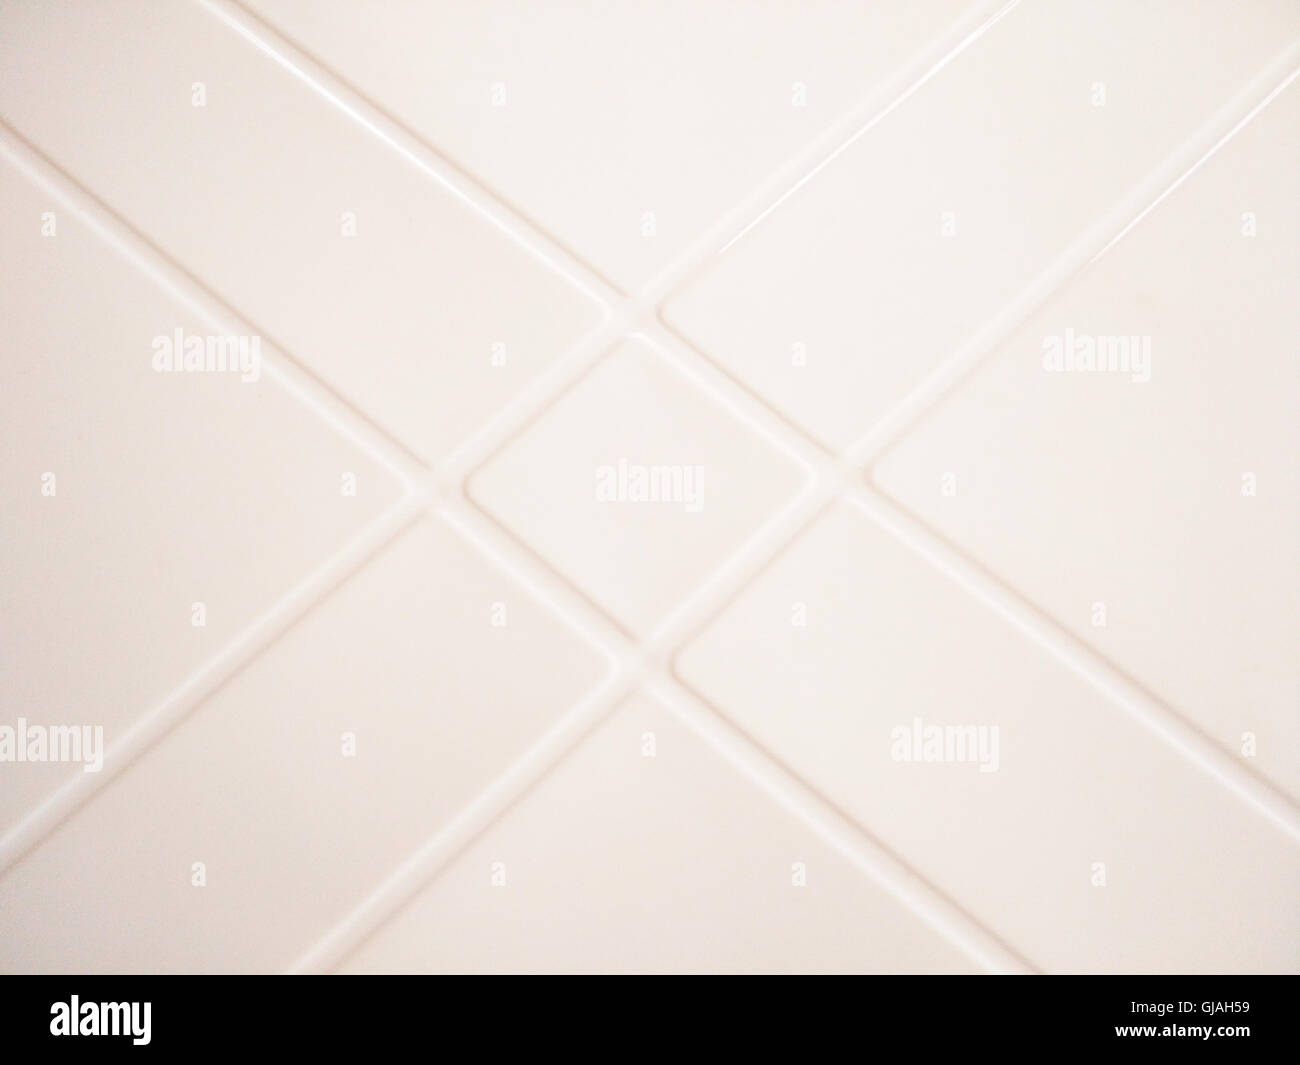 plastic surface with diagonal lines Stock Photo